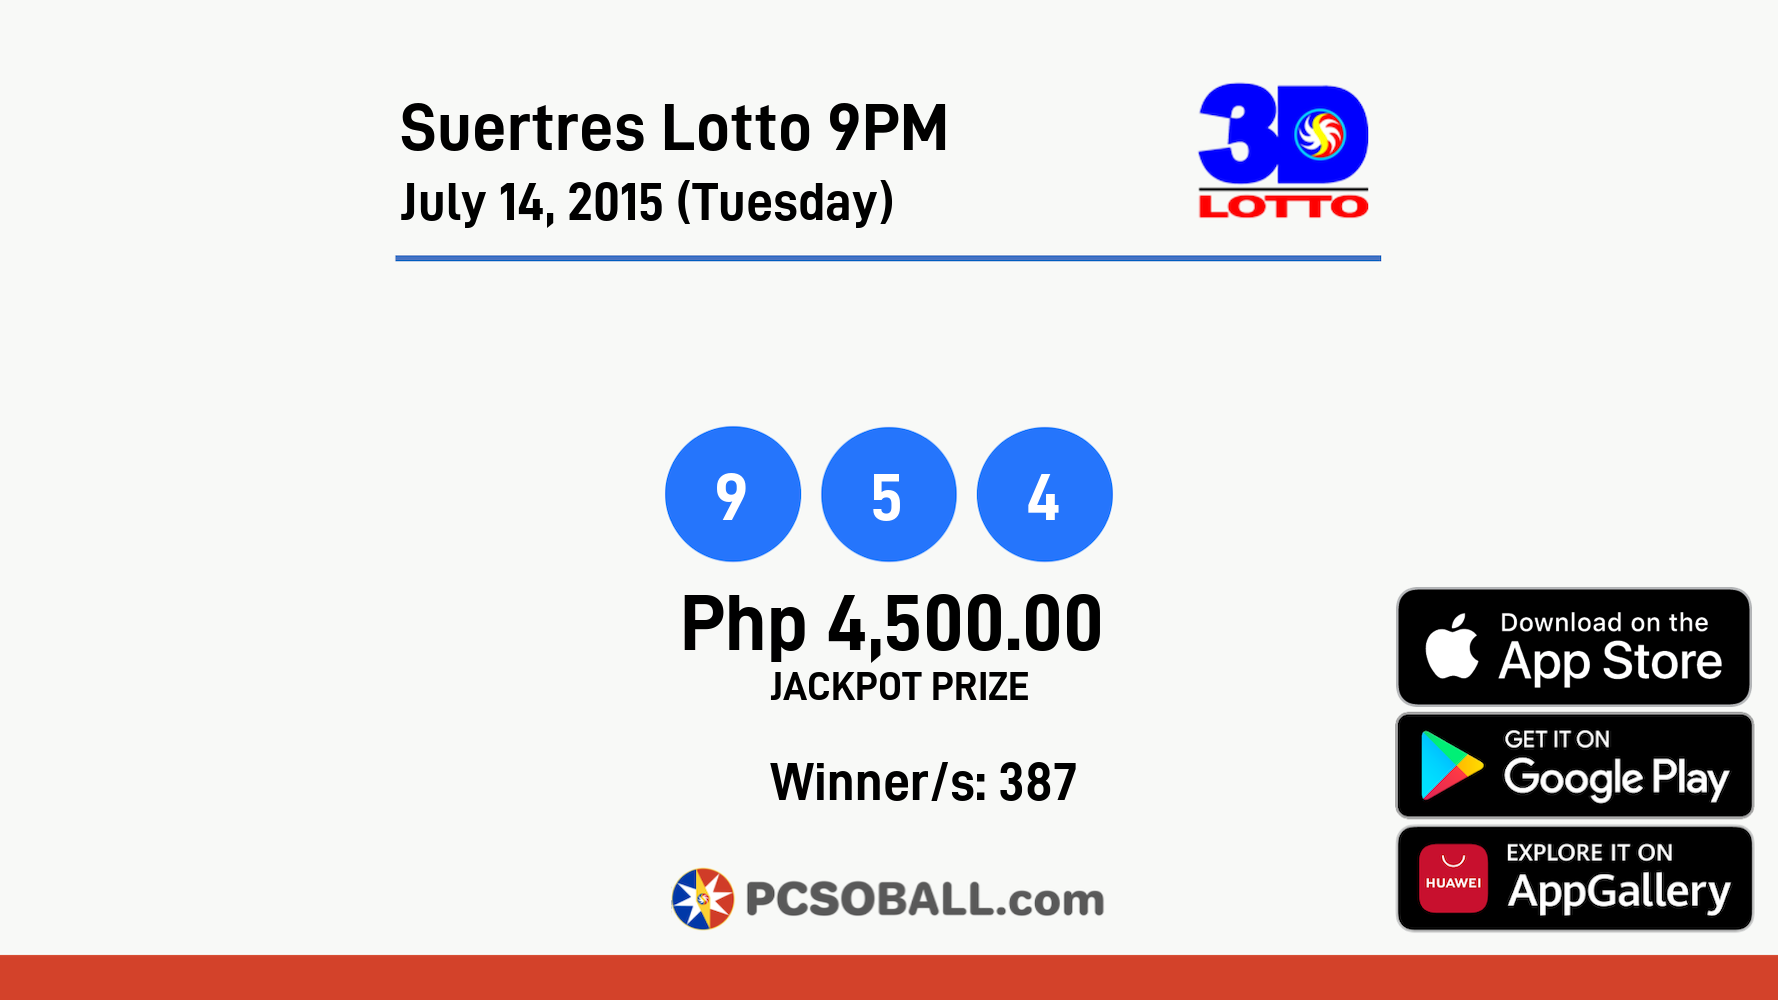 Suertres Lotto 9PM July 14, 2015 (Tuesday) Result